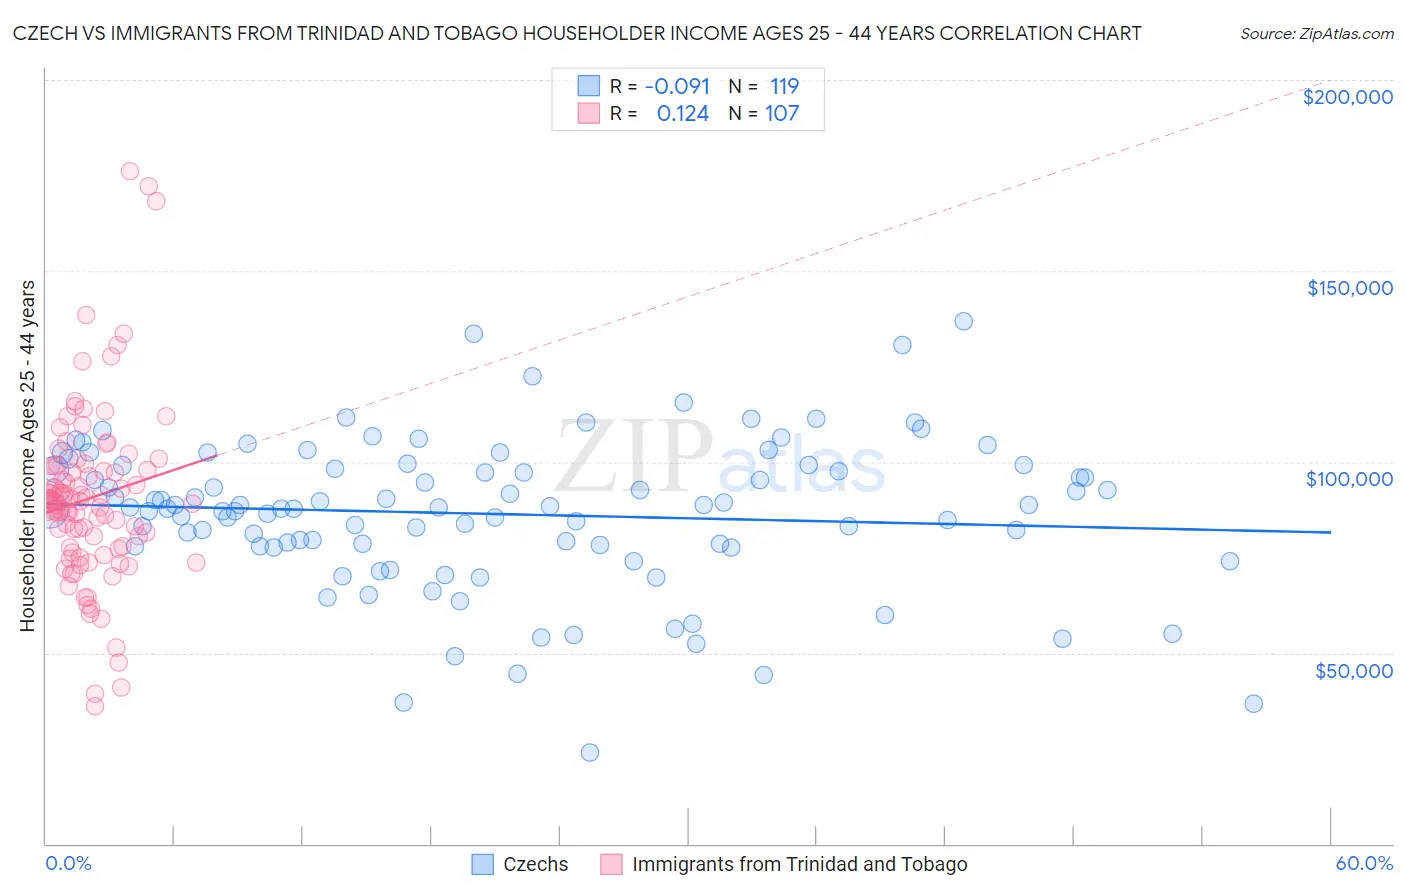 Czech vs Immigrants from Trinidad and Tobago Householder Income Ages 25 - 44 years